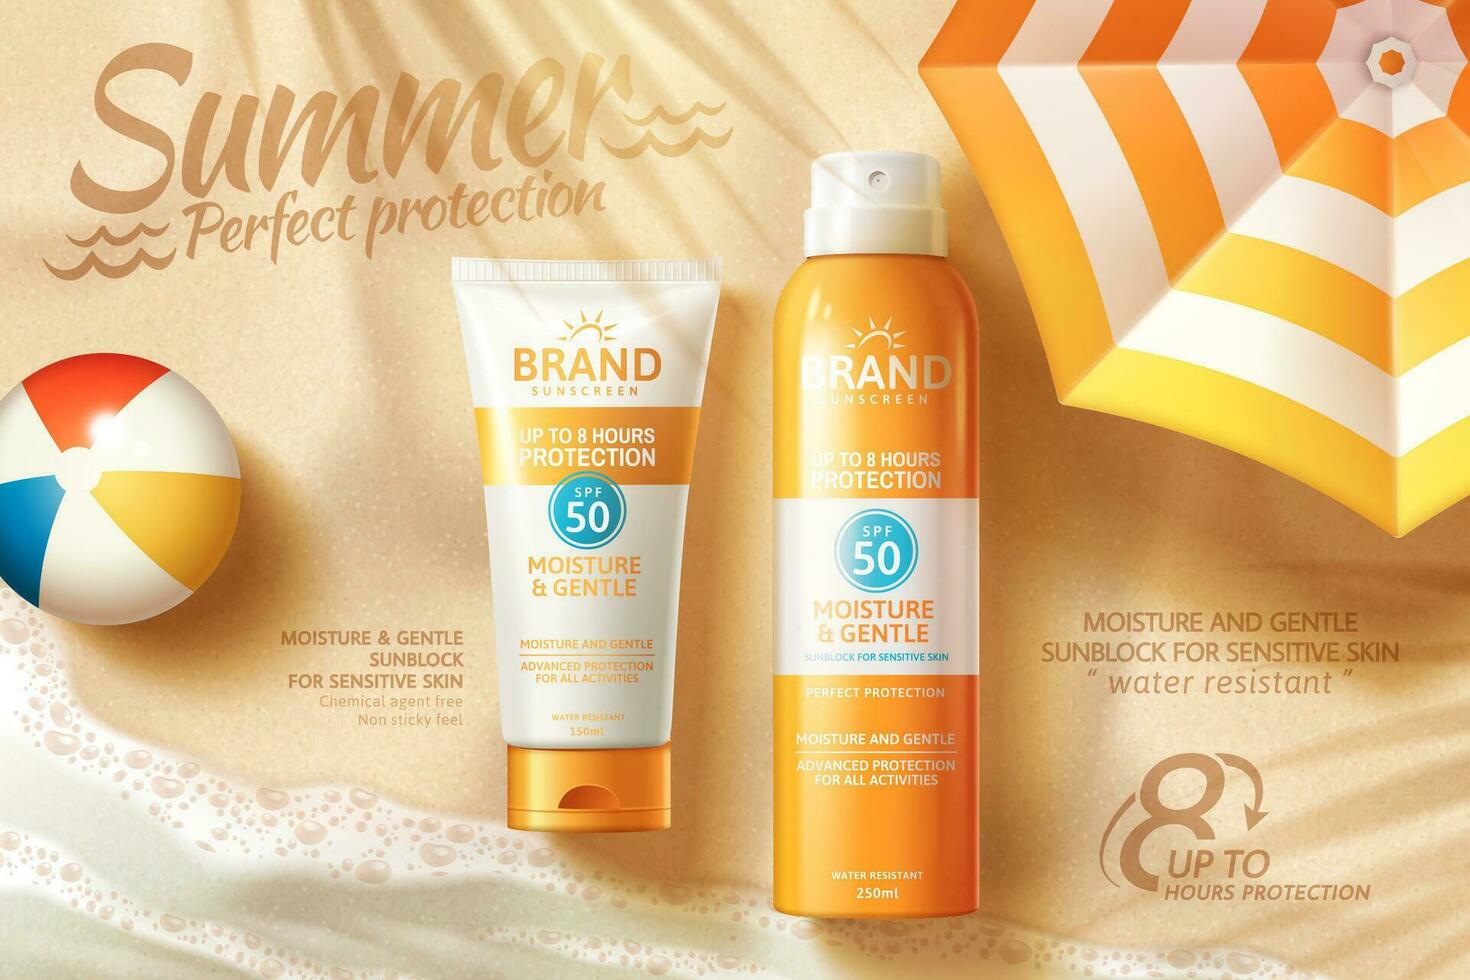 Sunscreen spray and tube ads laying on summer beach with parasol in 3d illustration vector